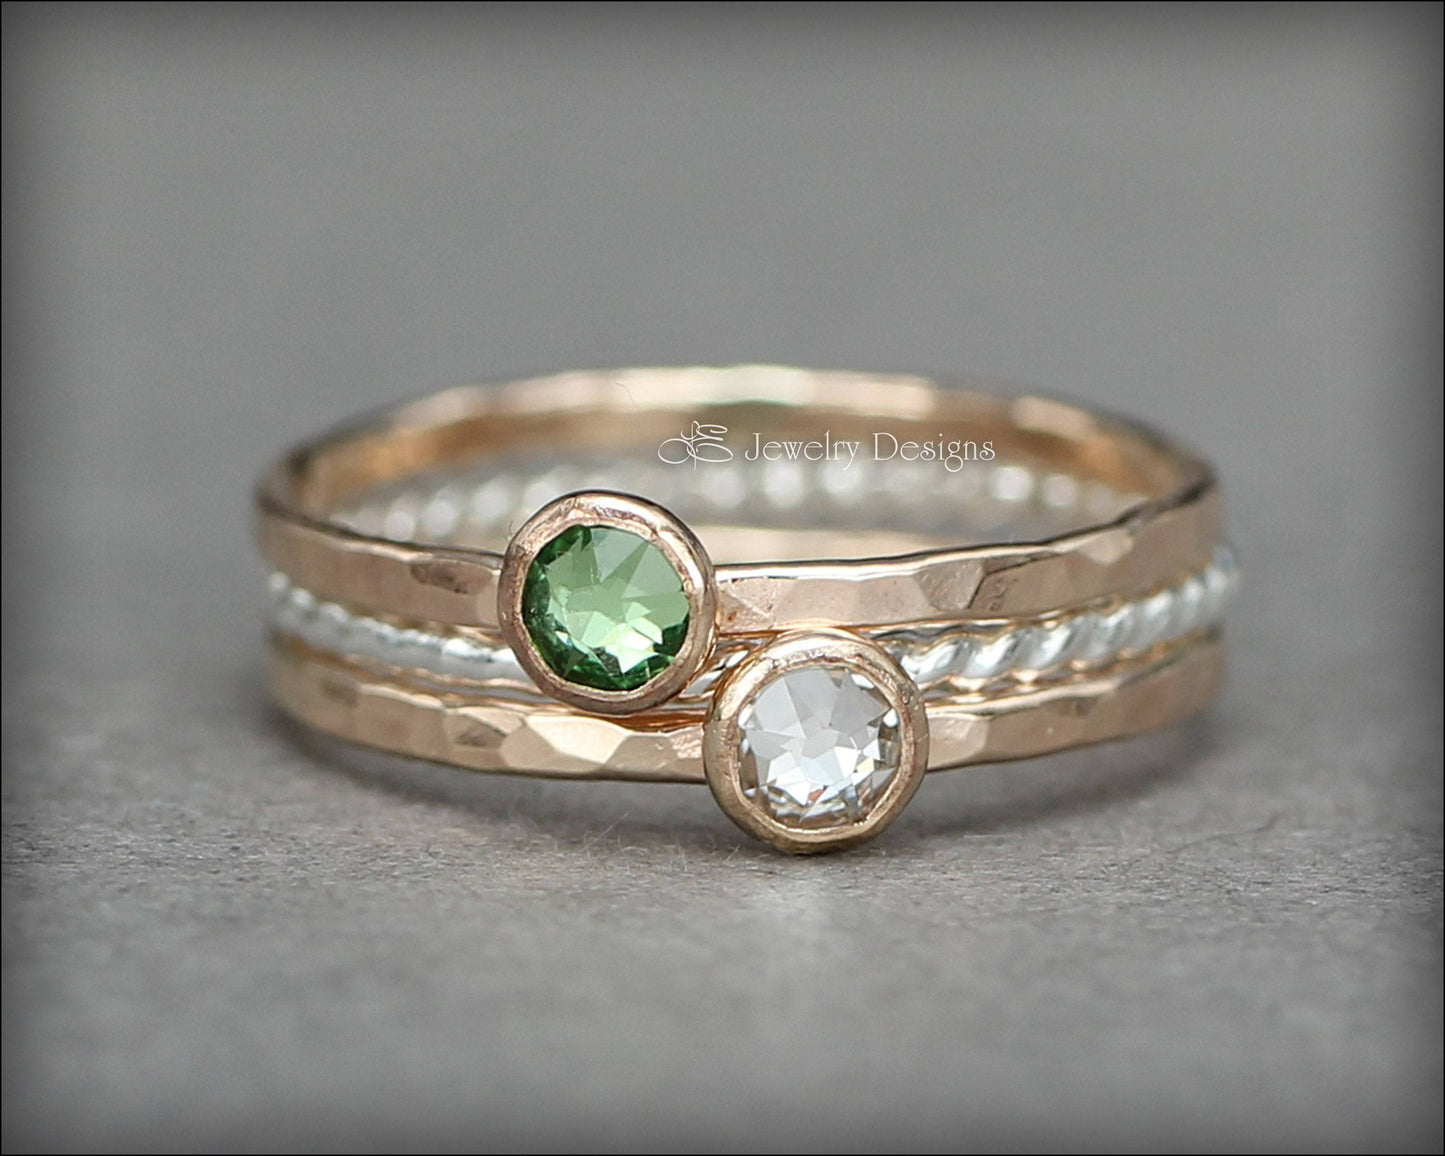 Birthstone Ring Set - (with 2 birthstones) - LE Jewelry Designs